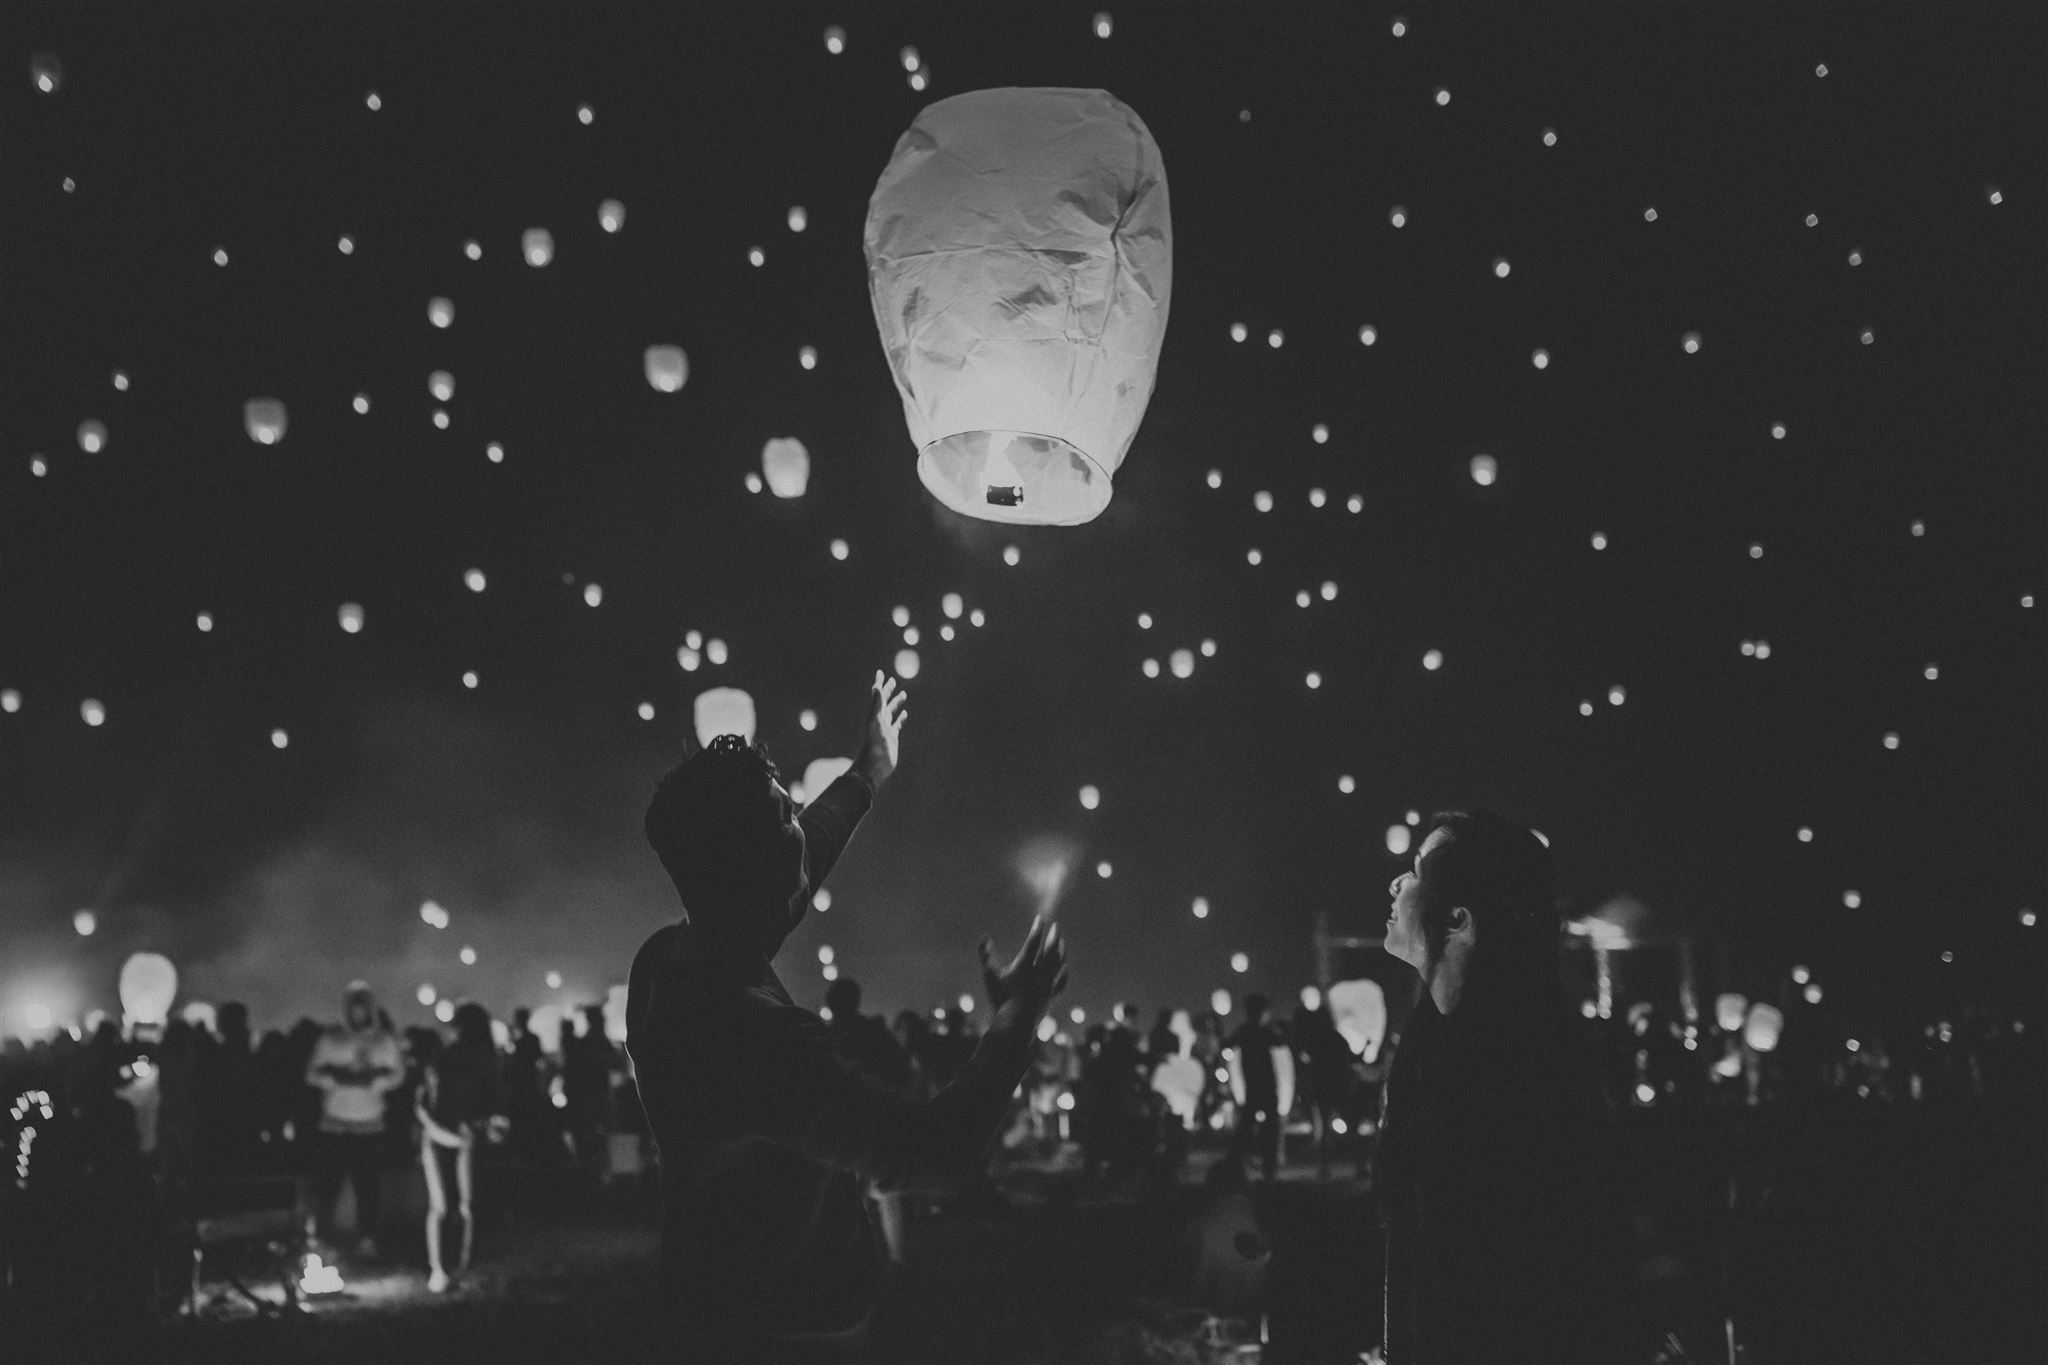 Hundreds of councils have taken action to ban sky lanterns, has yours? –  NFUonline